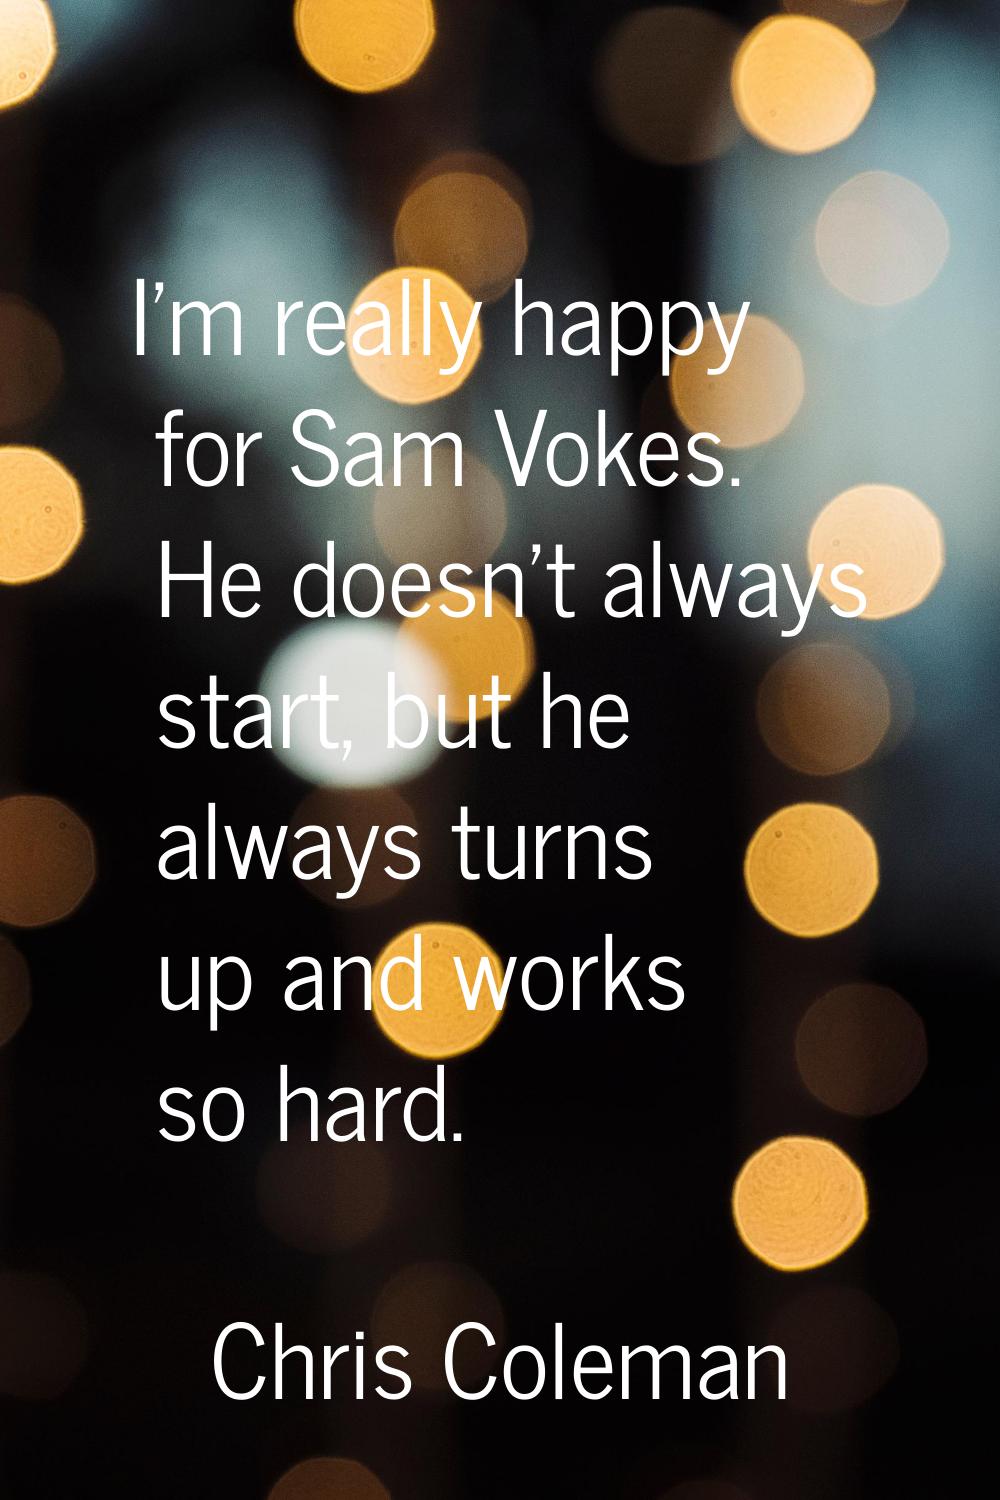 I'm really happy for Sam Vokes. He doesn't always start, but he always turns up and works so hard.